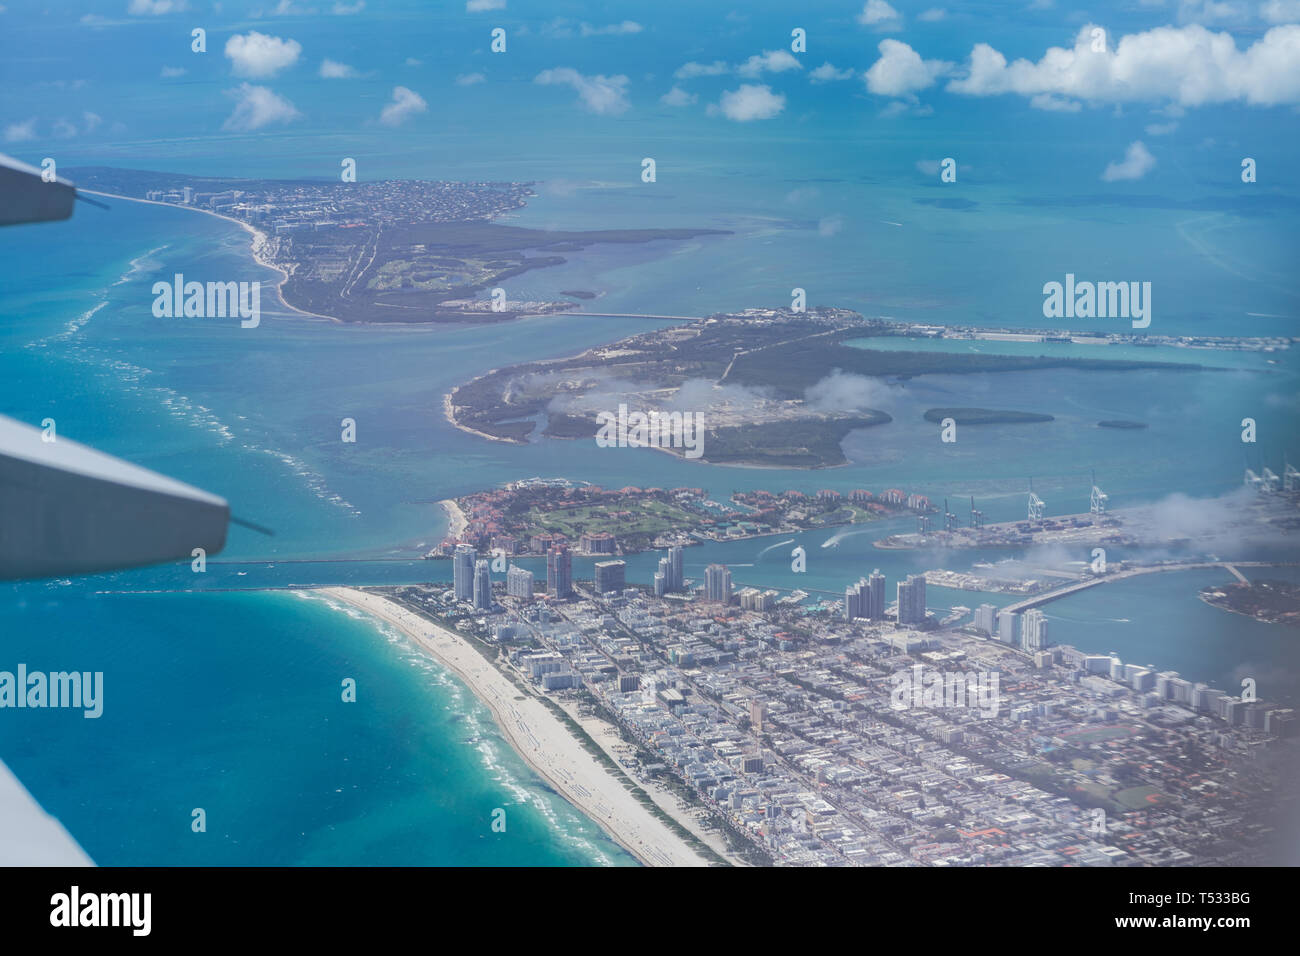 Aeriel Photograph of South Beach, Miami, taken from Virgin Atlantic Boeing 747 after take off Stock Photo